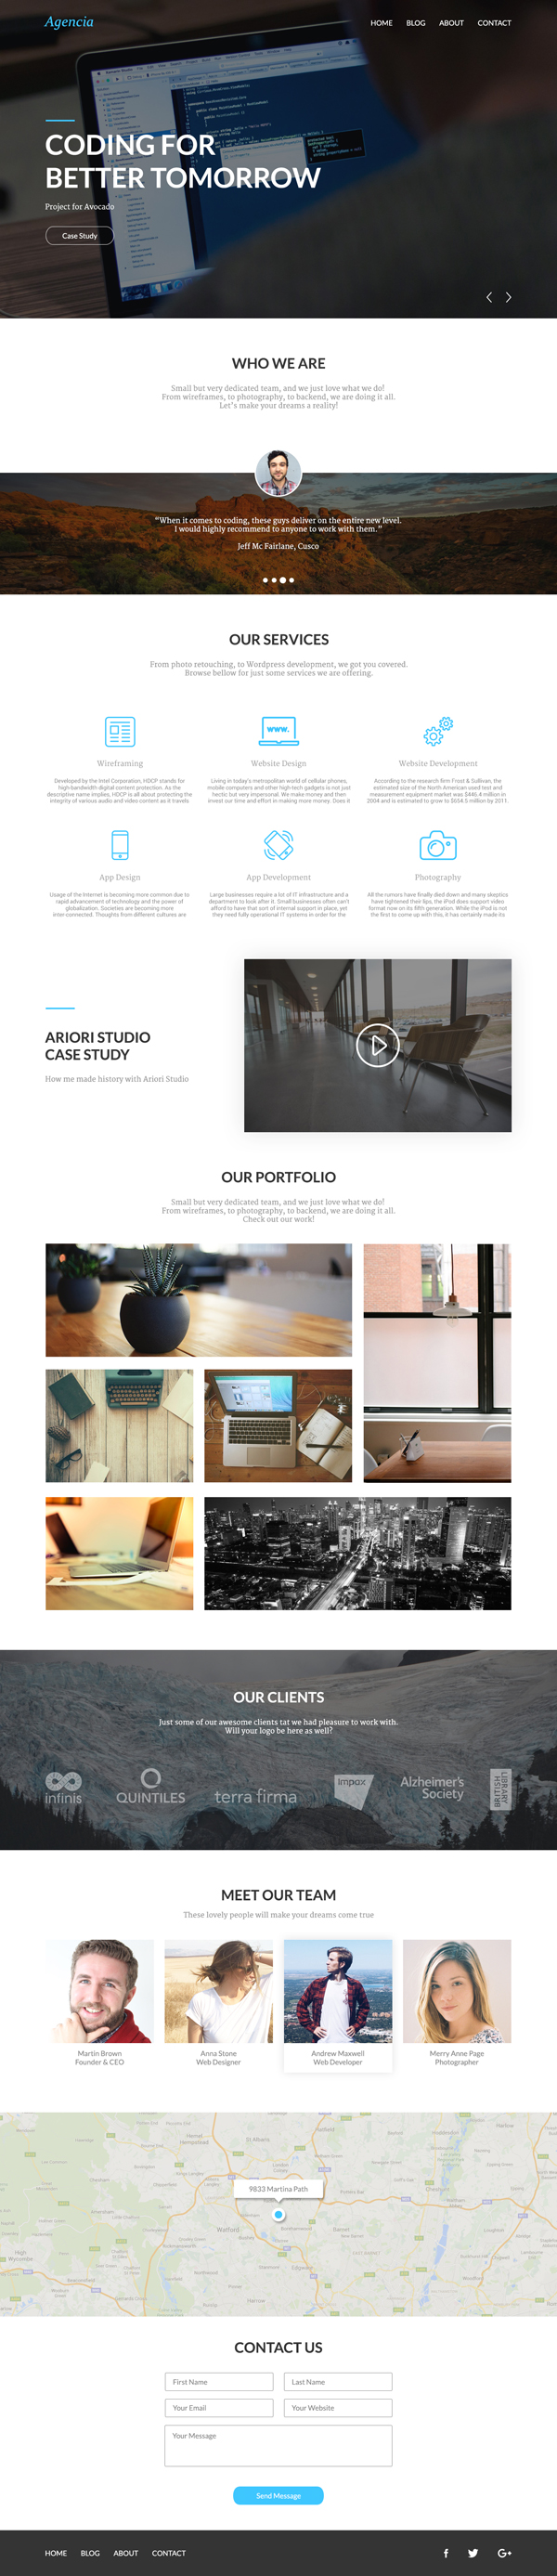 Agencia – FREE One Page PSD Template